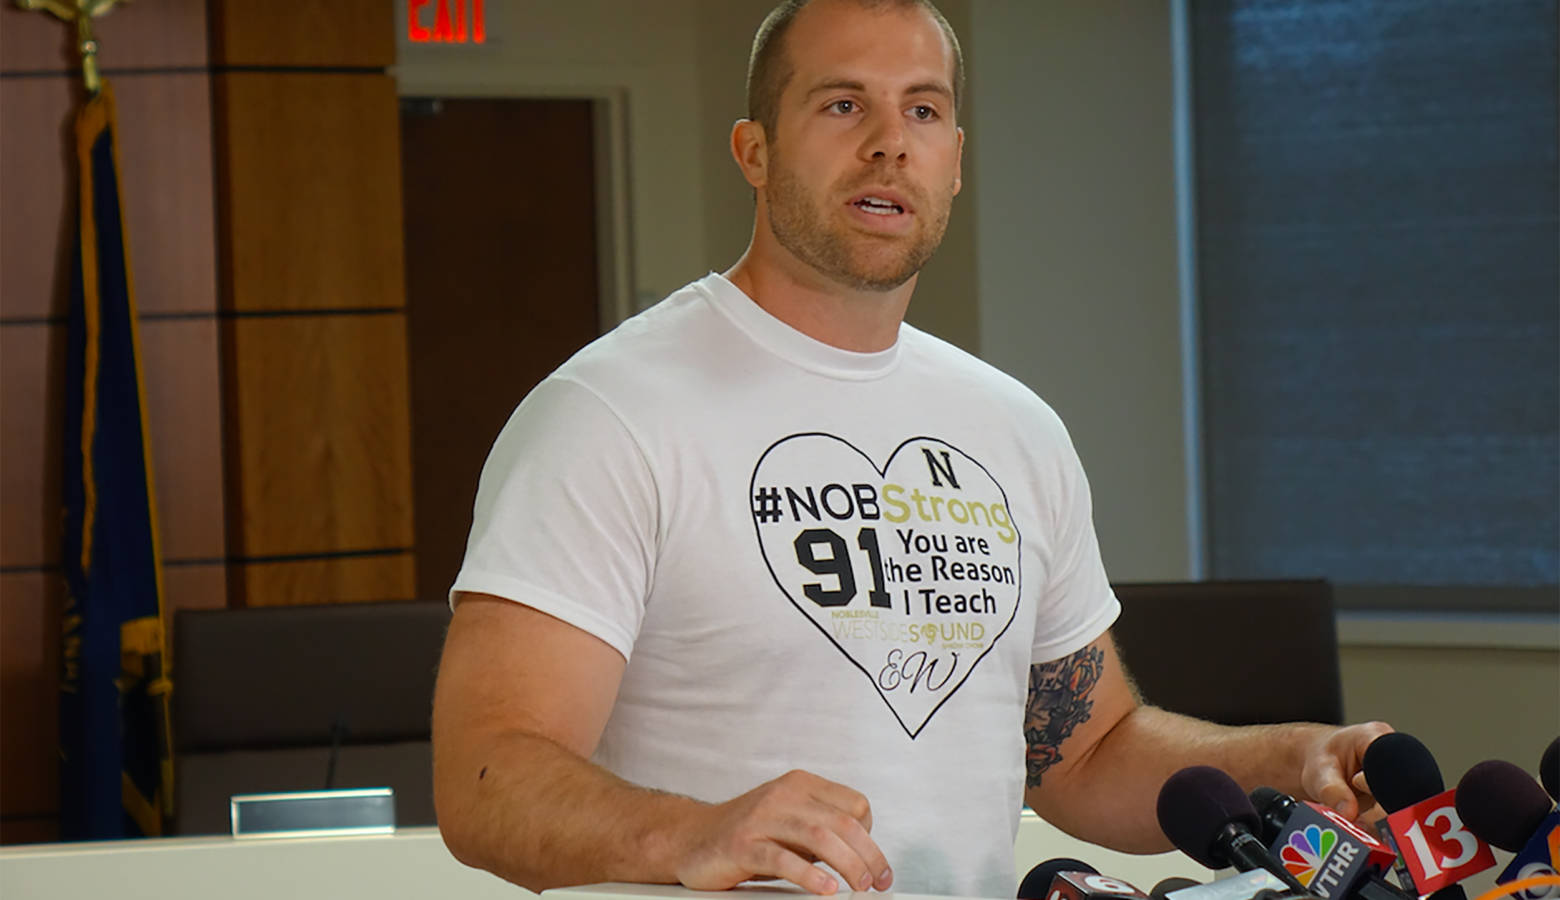 Seventh grade teacher Jason Seaman, who is credited with tackling the shooter at Noblesville West Middle School, speaks at a press conference Monday. (Eric Weddle/WFYI News)